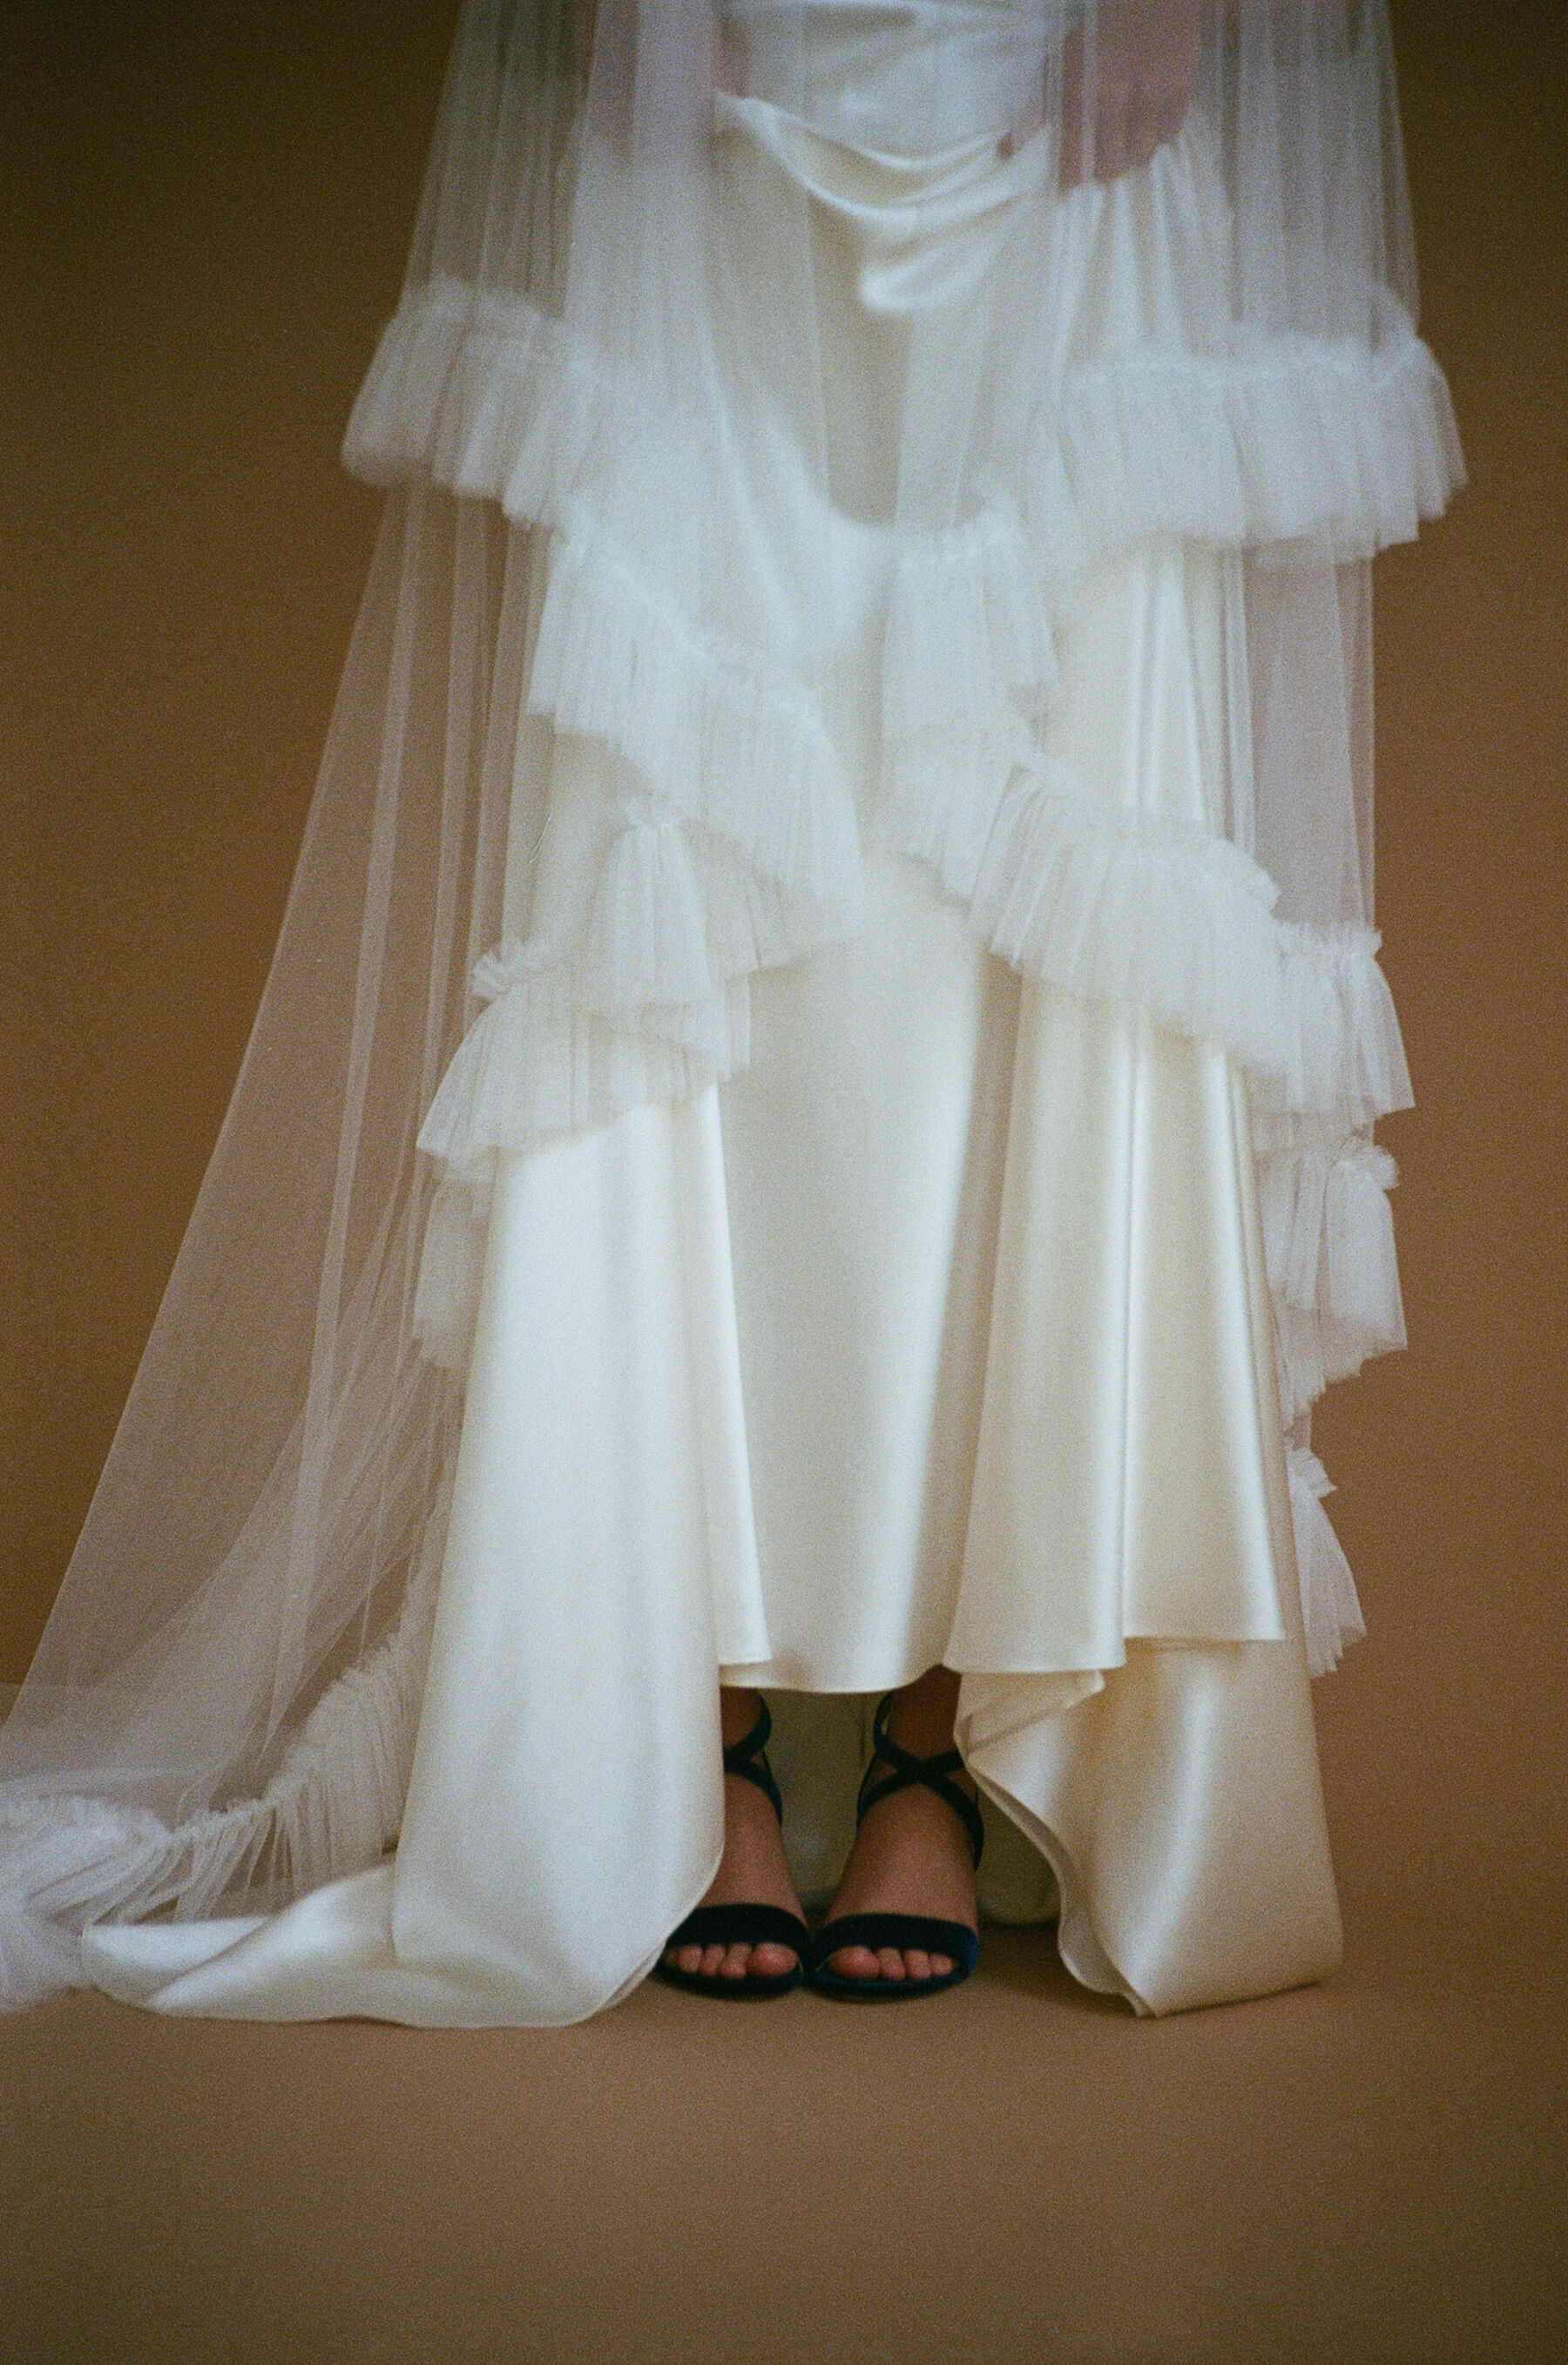 Analogue photograph of an ethical wedding dress by British designer, Kate Beaumont and frilly edged wedding veil